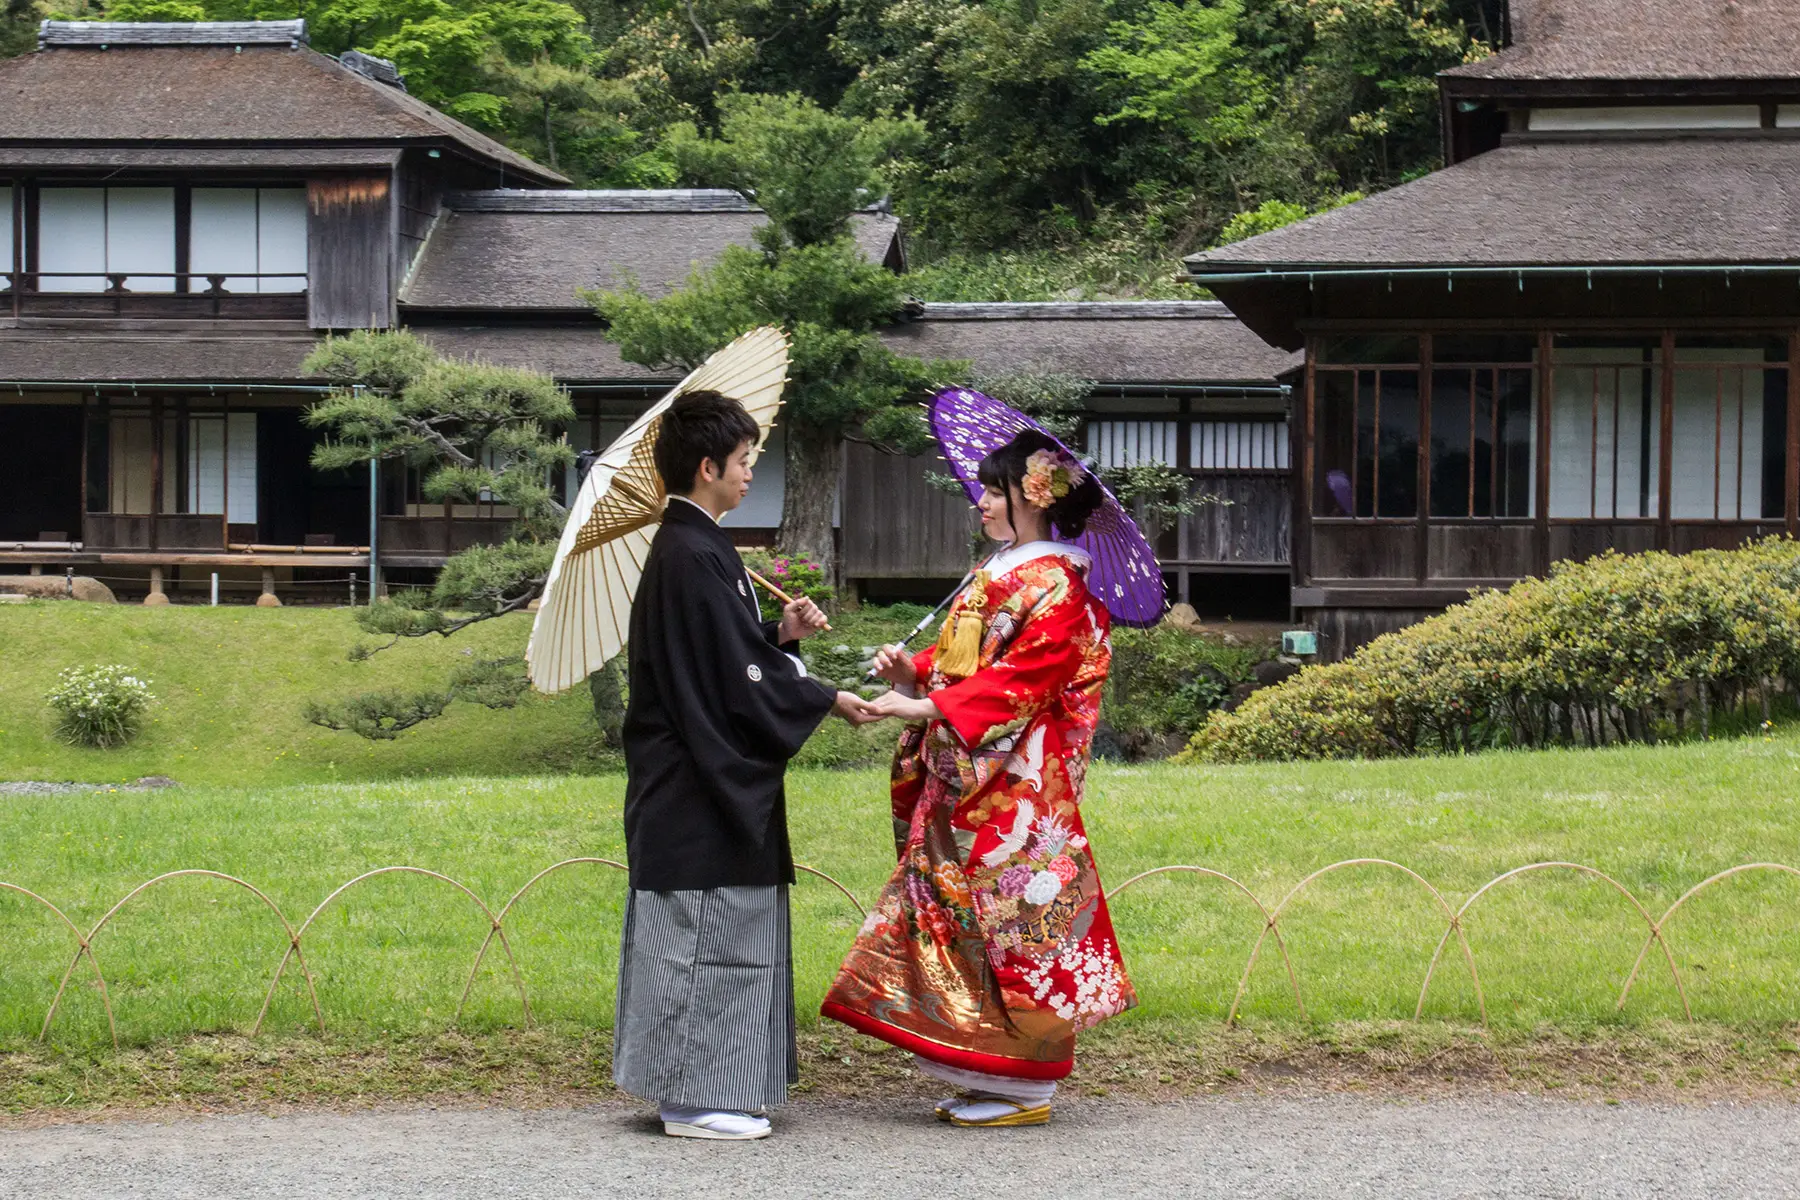 A couple in wedding clothing in the grounds of Yokohama gardens